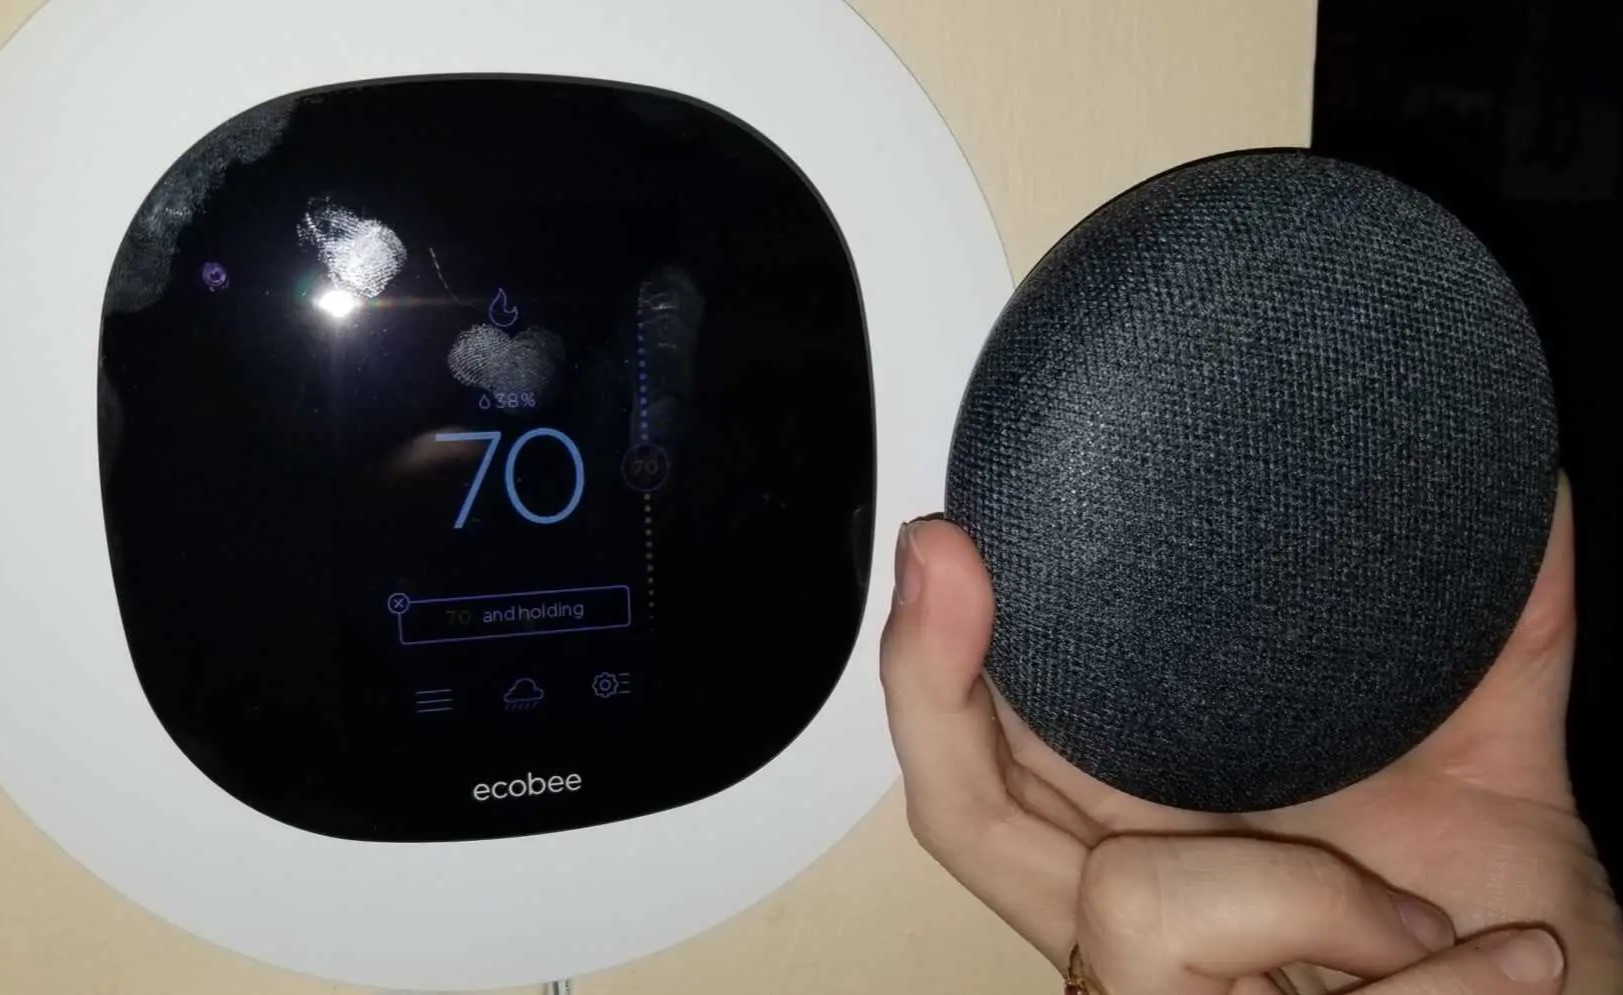 How To Add Ecobee To Google Home